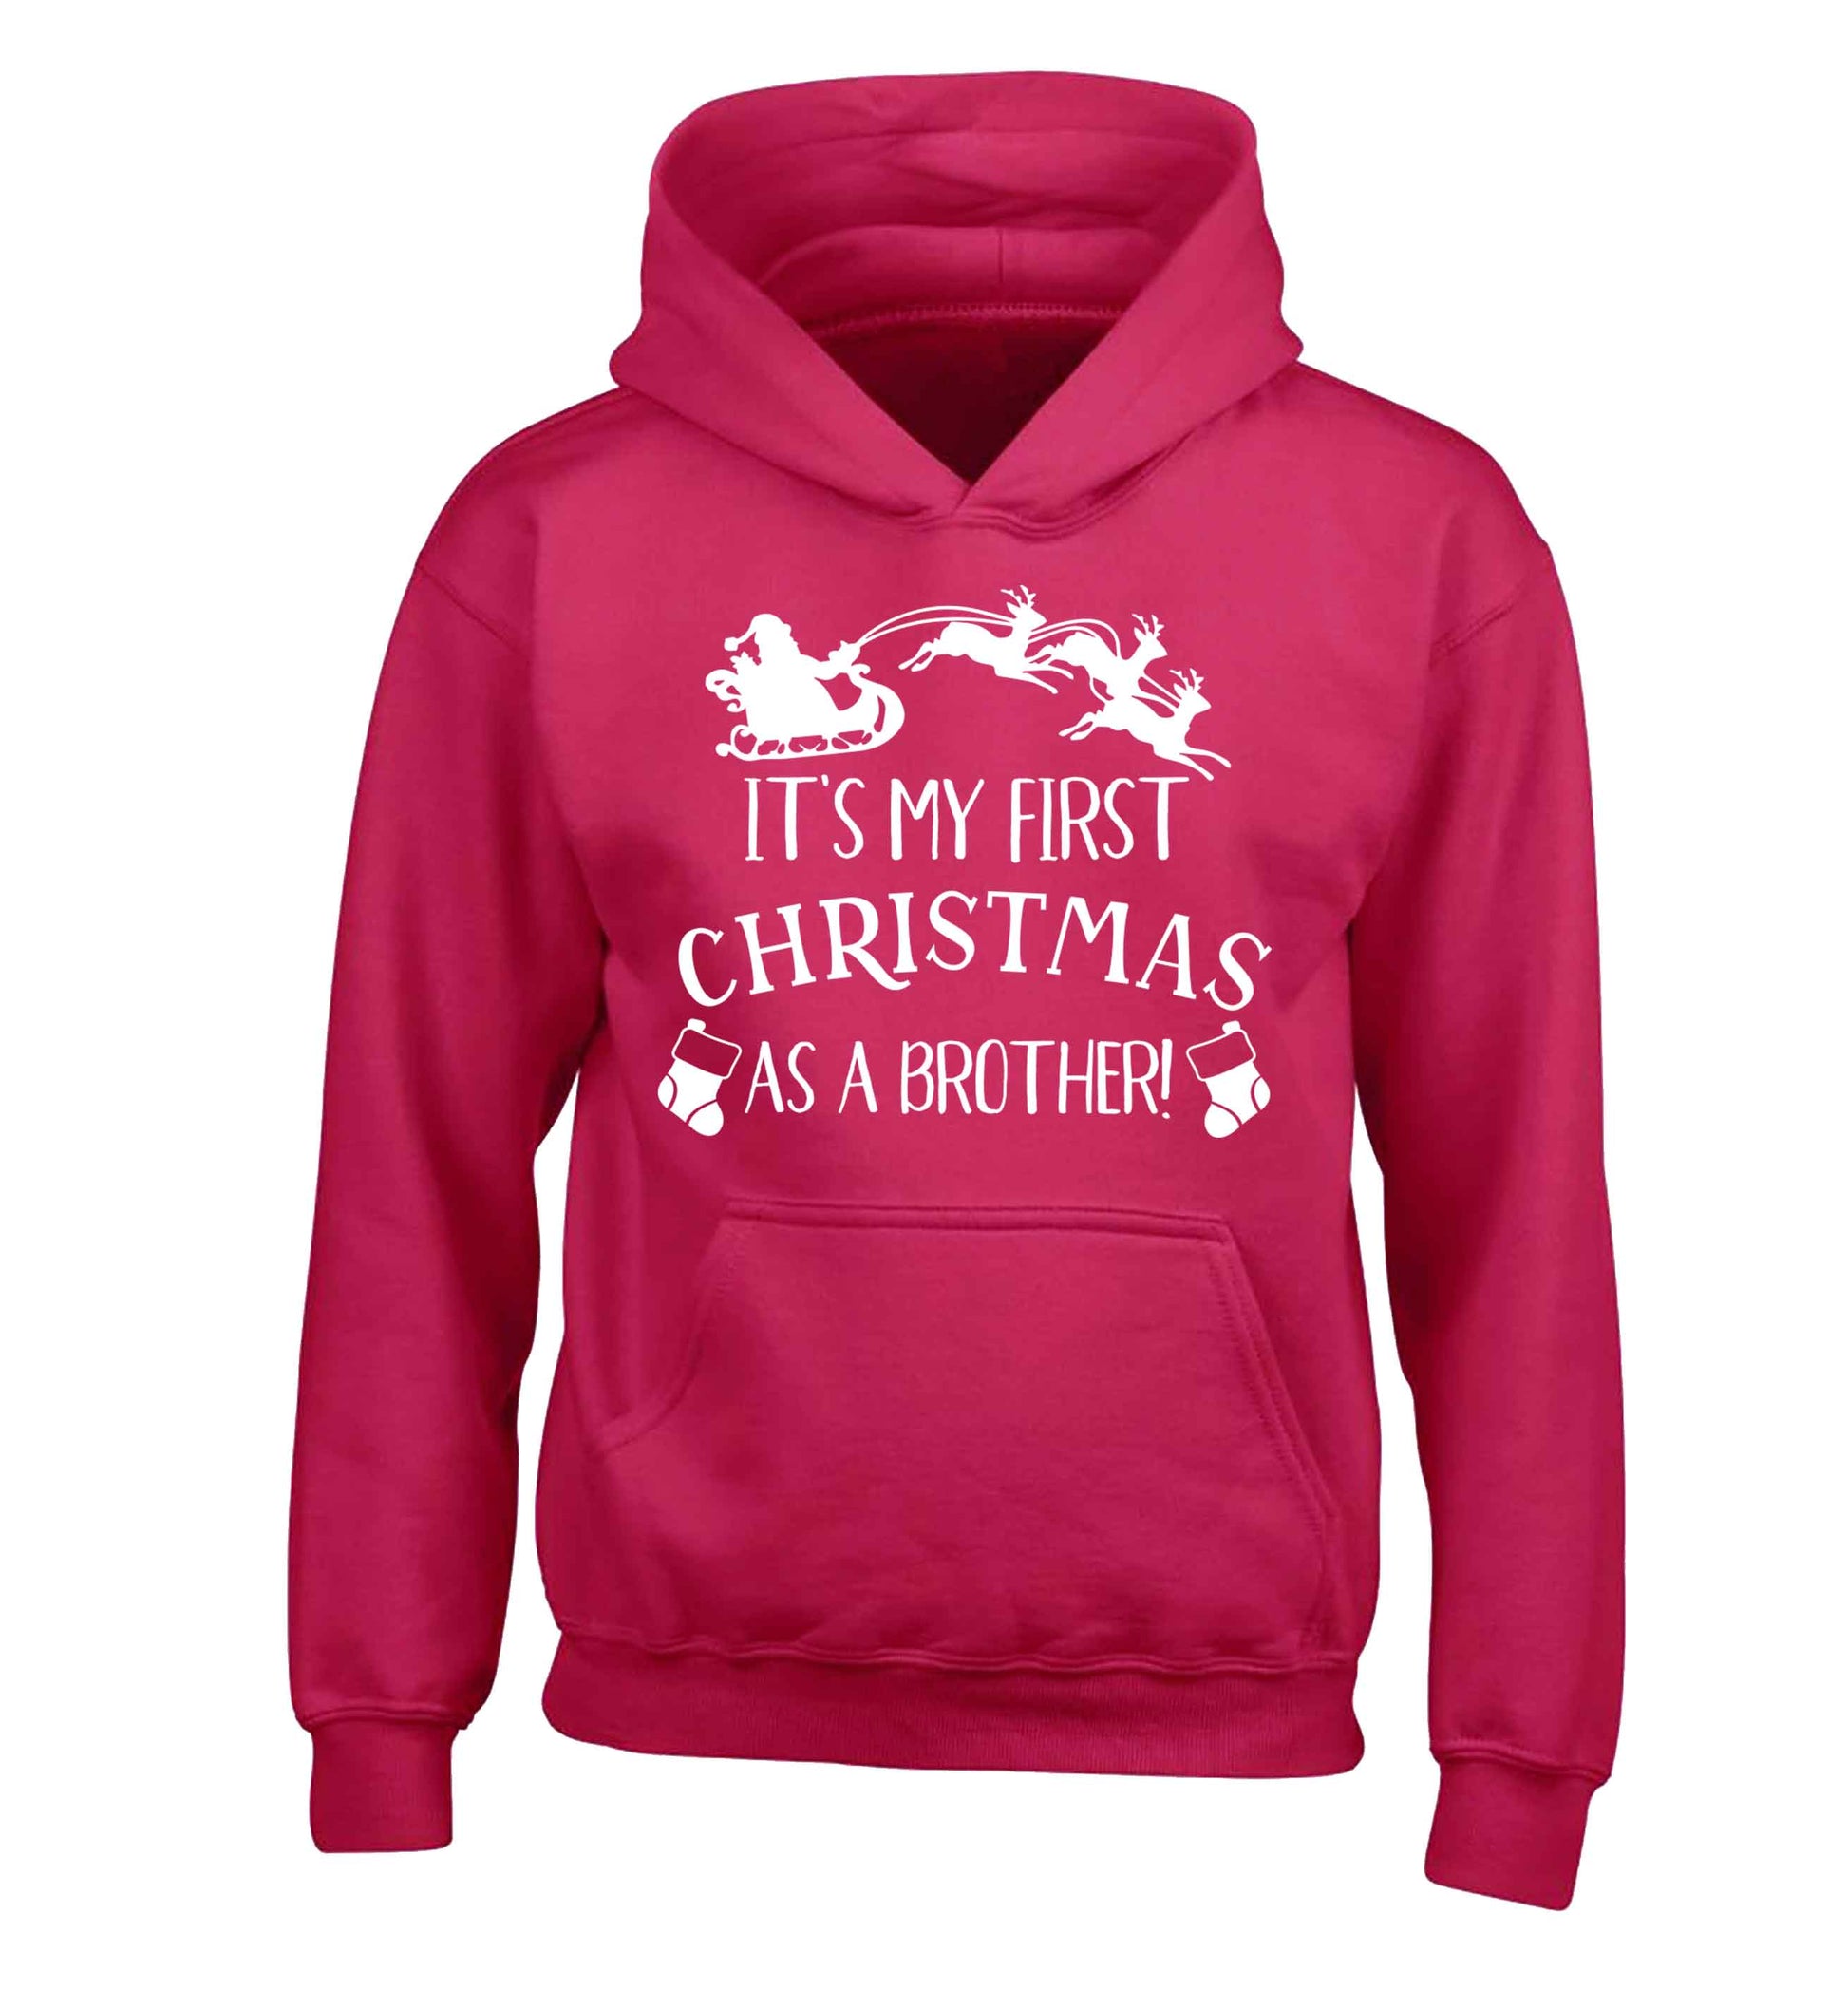 It's my first Christmas as a brother! children's pink hoodie 12-13 Years